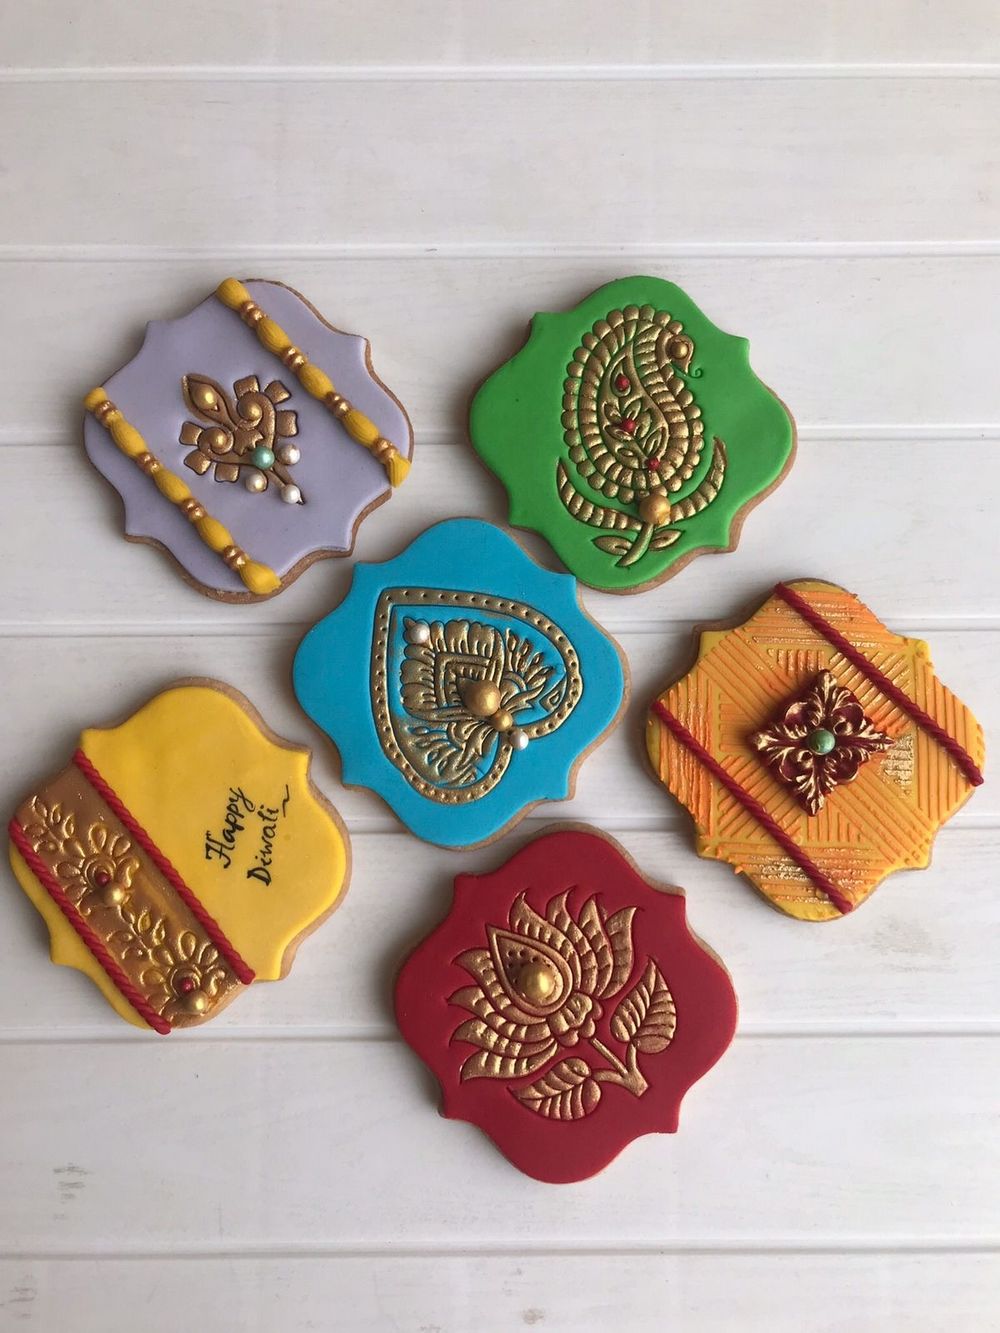 Photo From Zardozi Cookies - By The Great Baking Co.